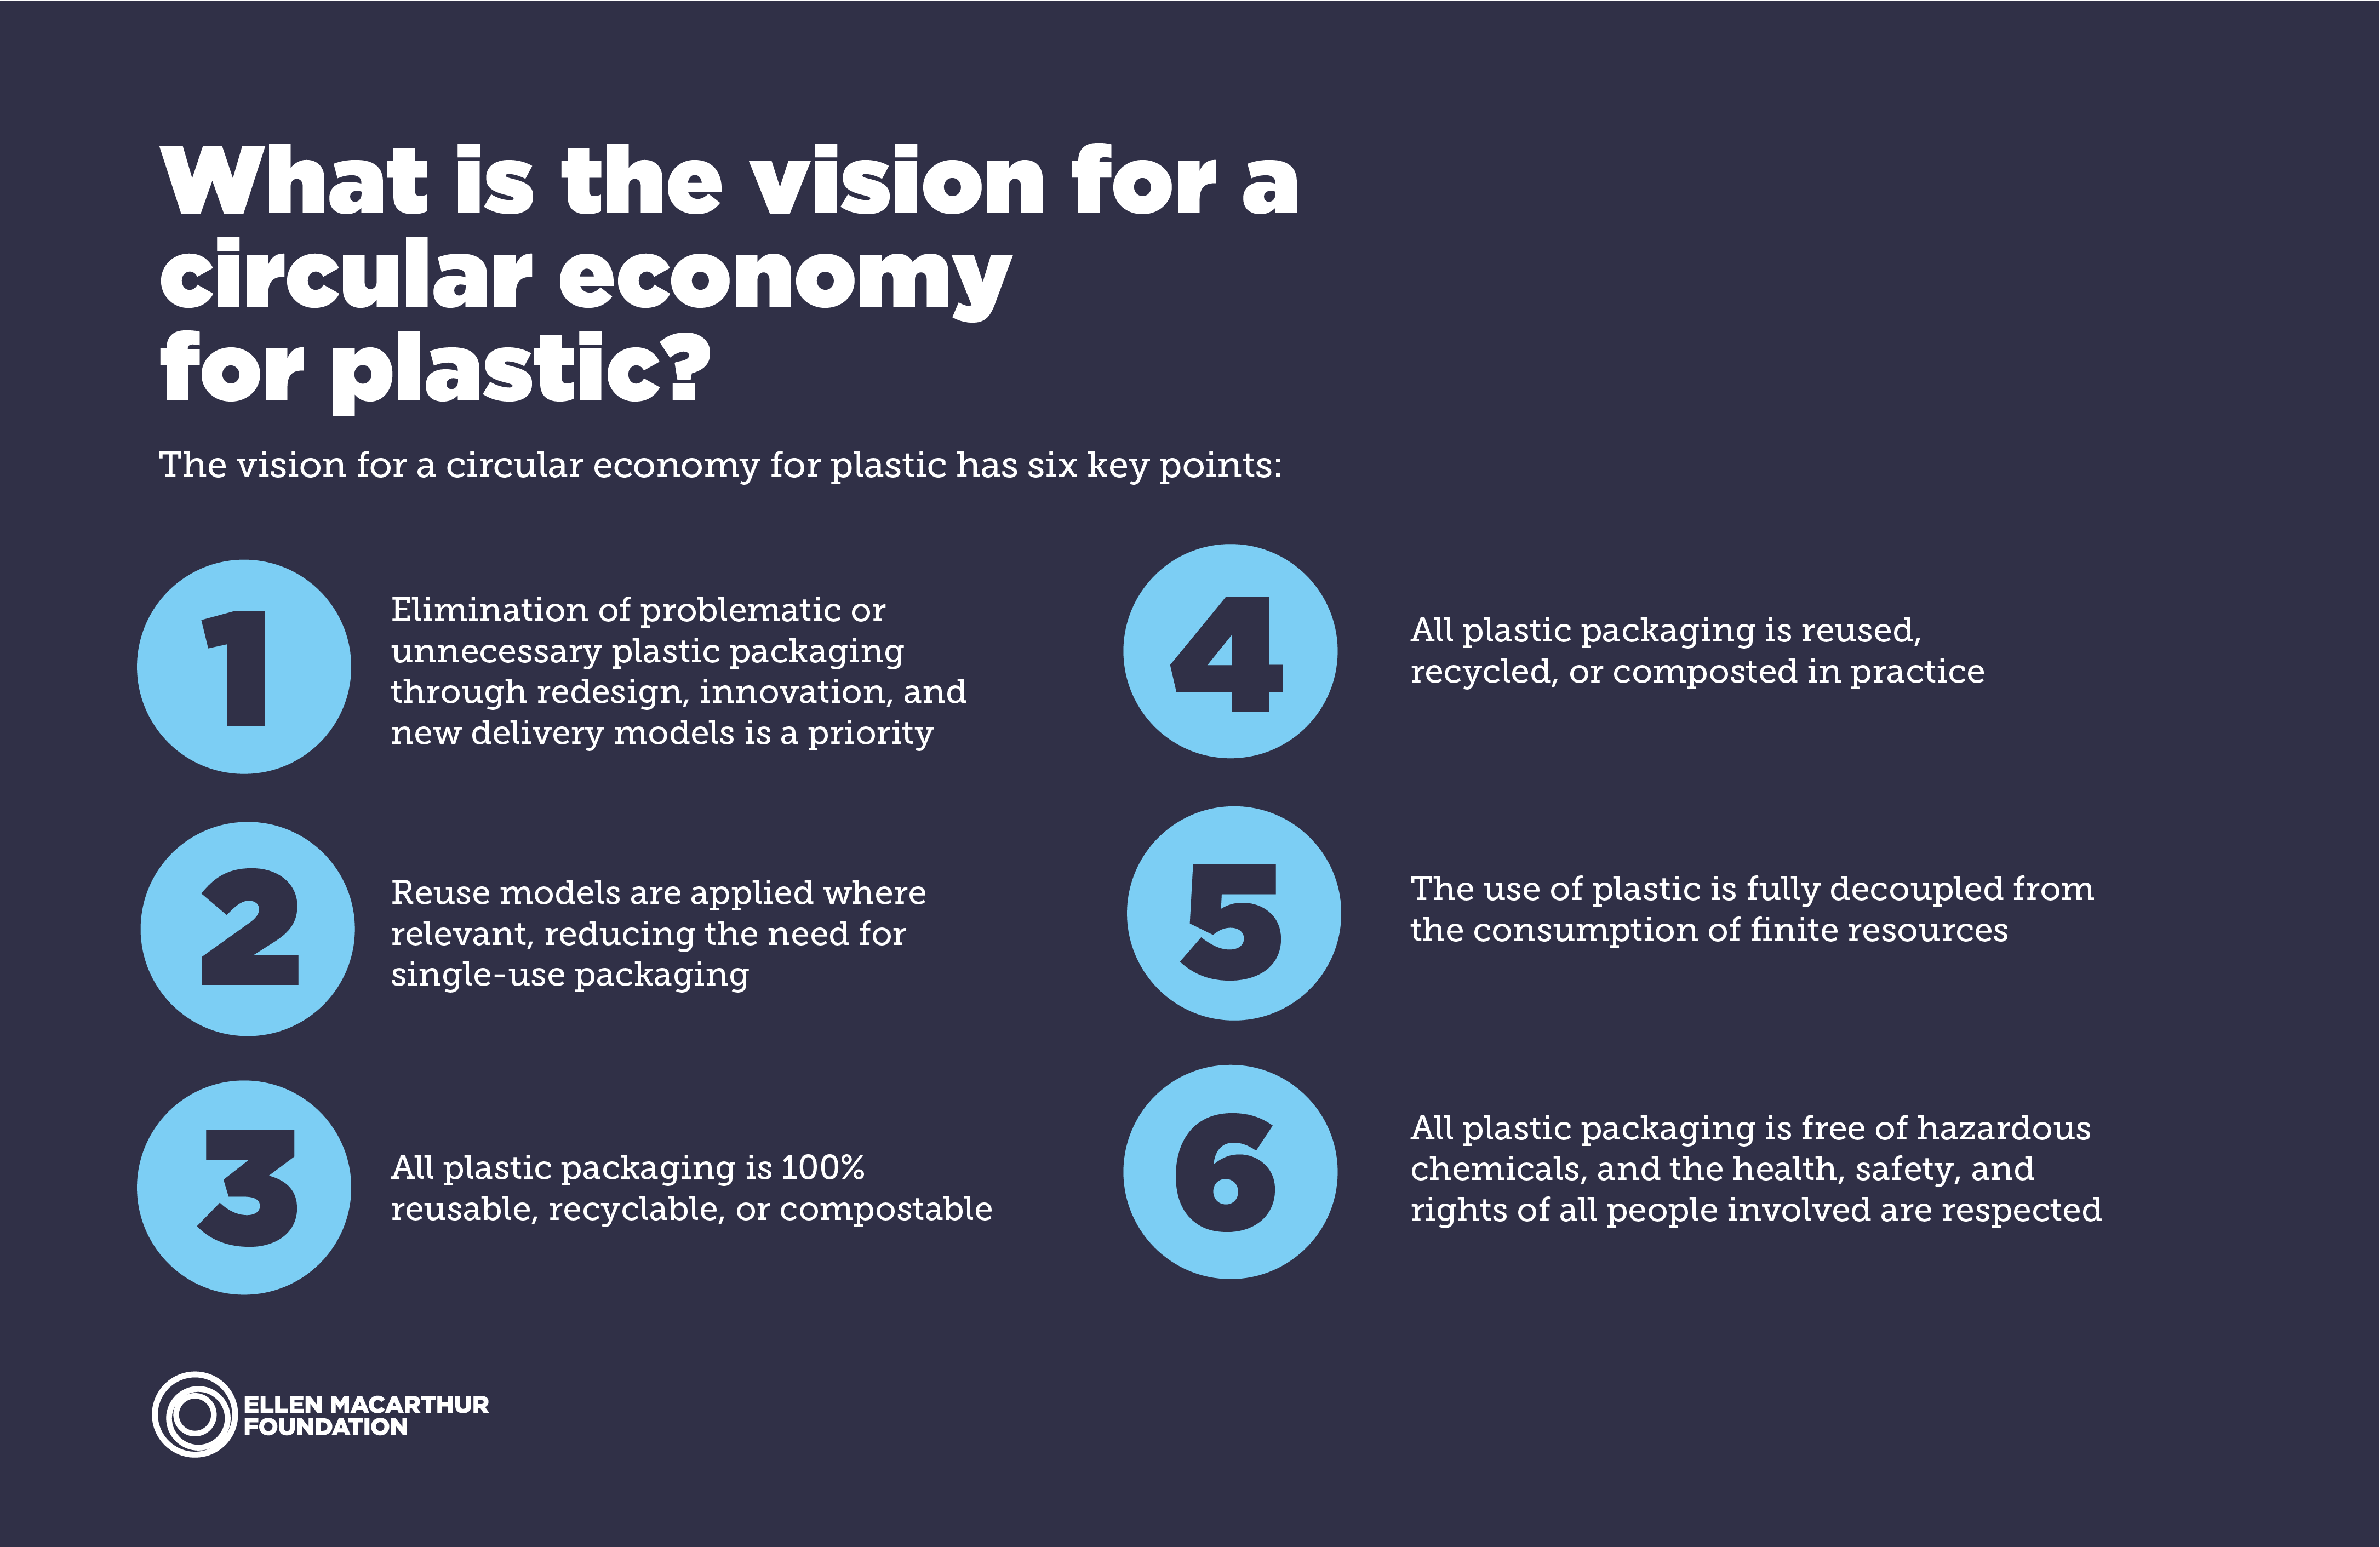 What is the vision for a circular economy for plastic?